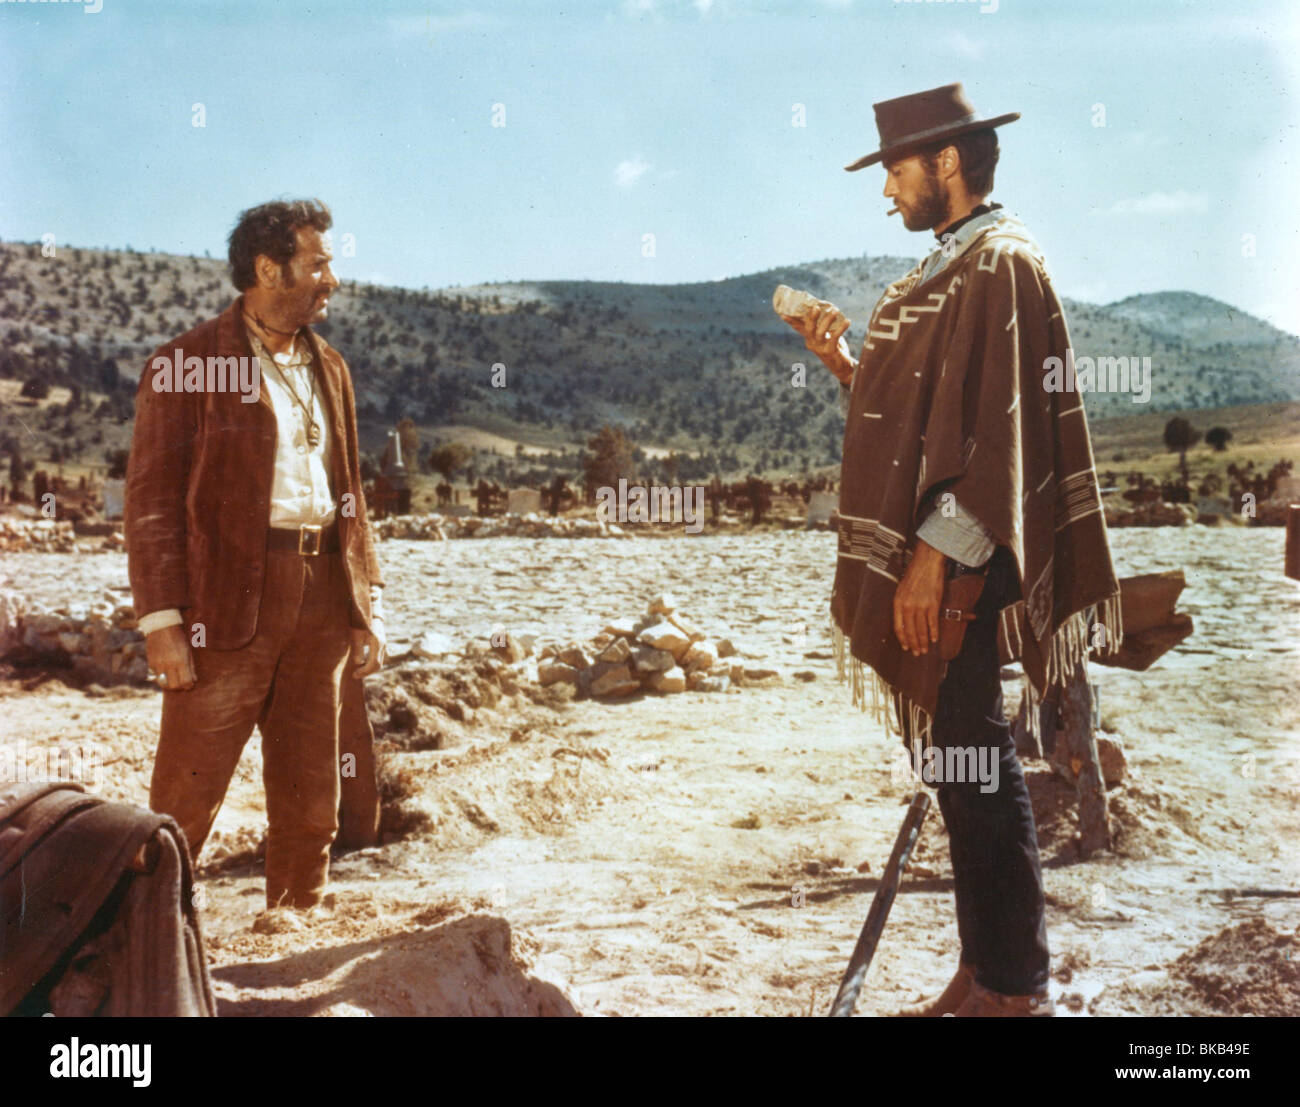 THE GOOD THE BAD AND THE UGLY CLINT EASTWOOD ELI WALLACH GREAT PHOTO 